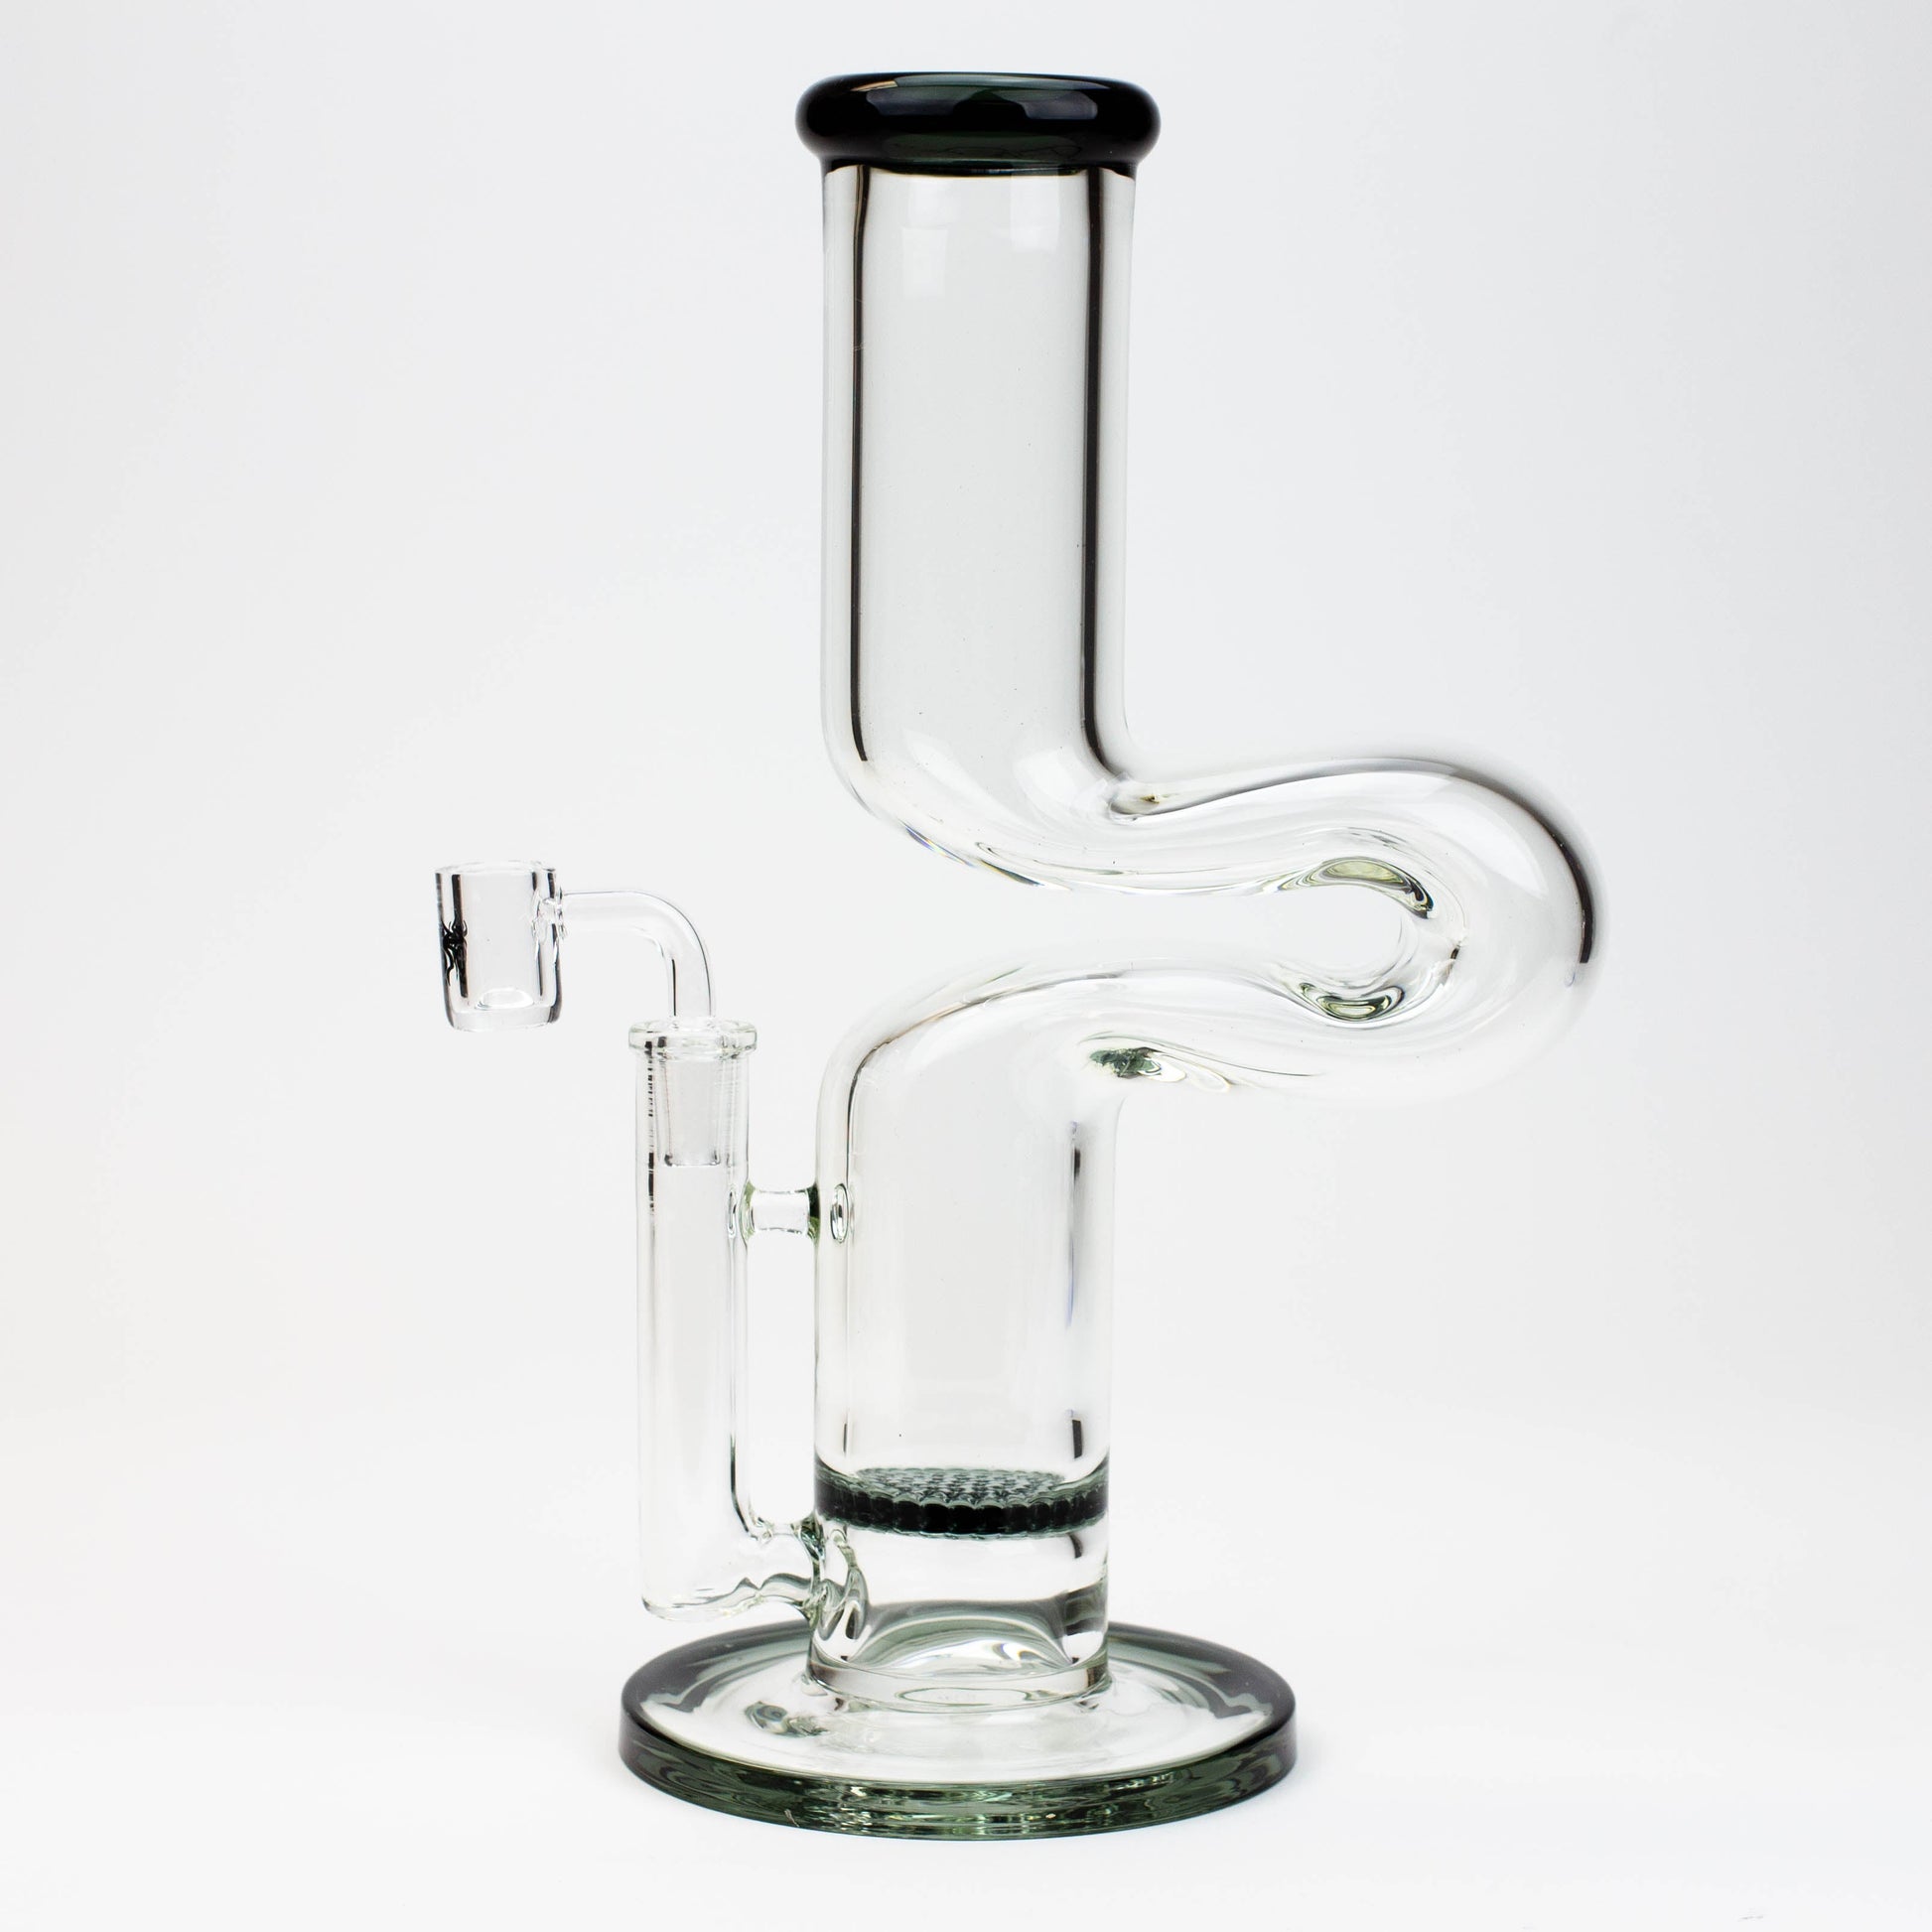 11.5" 2-in-1 7mm Kink glass water bong_9